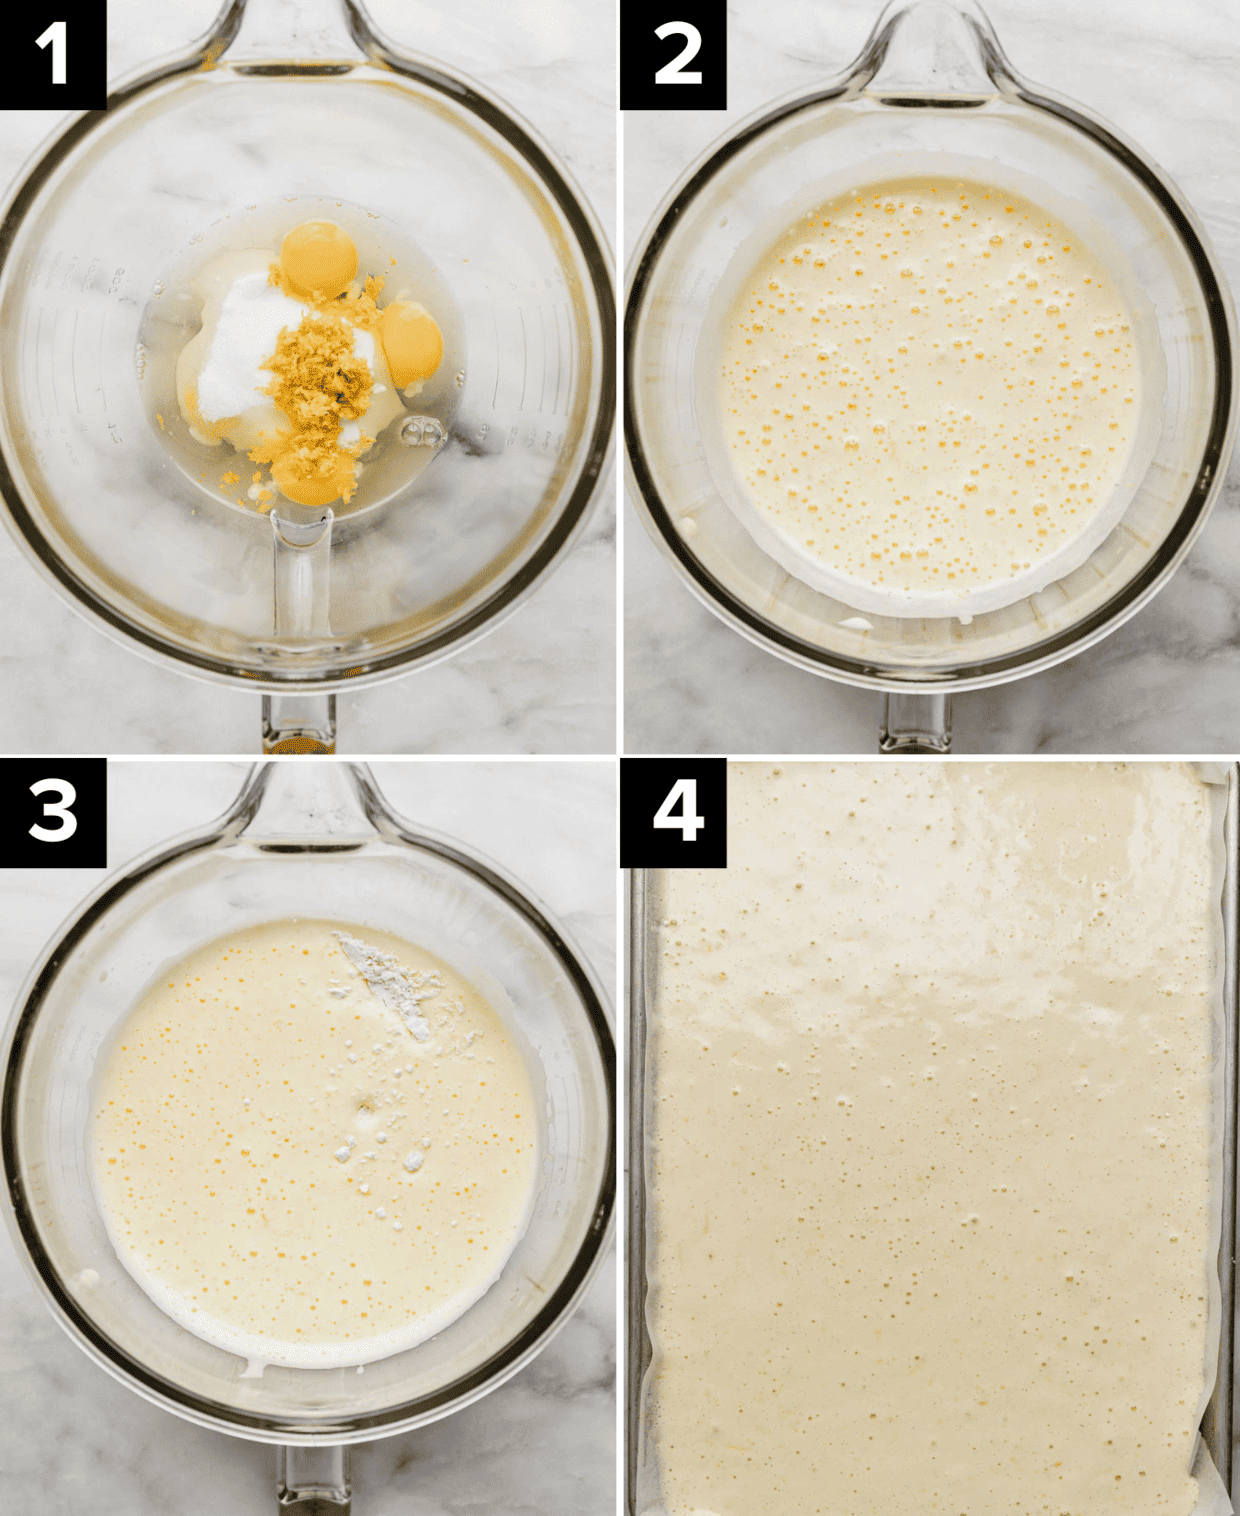 Four images showing how to make Lemon Swiss Roll batter, top left image is glass bowl with eggs and sugar and lemon zest in it, top right image is Lemon Swiss Roll batter in glass bowl, bottom left image is batter with flour in it, and bottom right image is baking sheet filled with Lemon Swiss Roll batter.